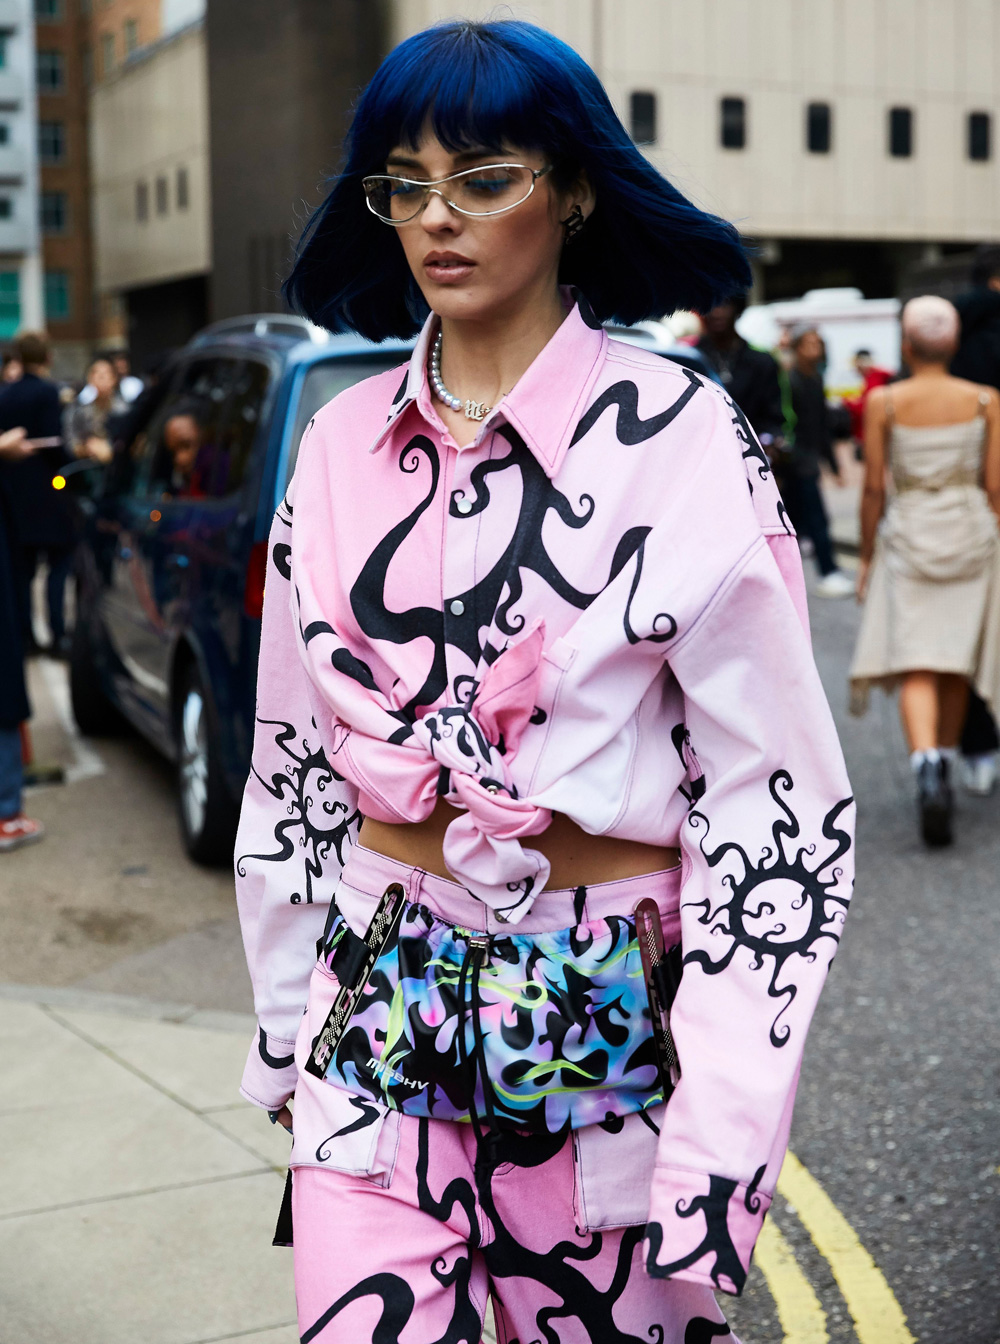 The Best Street Style Looks from London Fashion Week 2019 | About Her